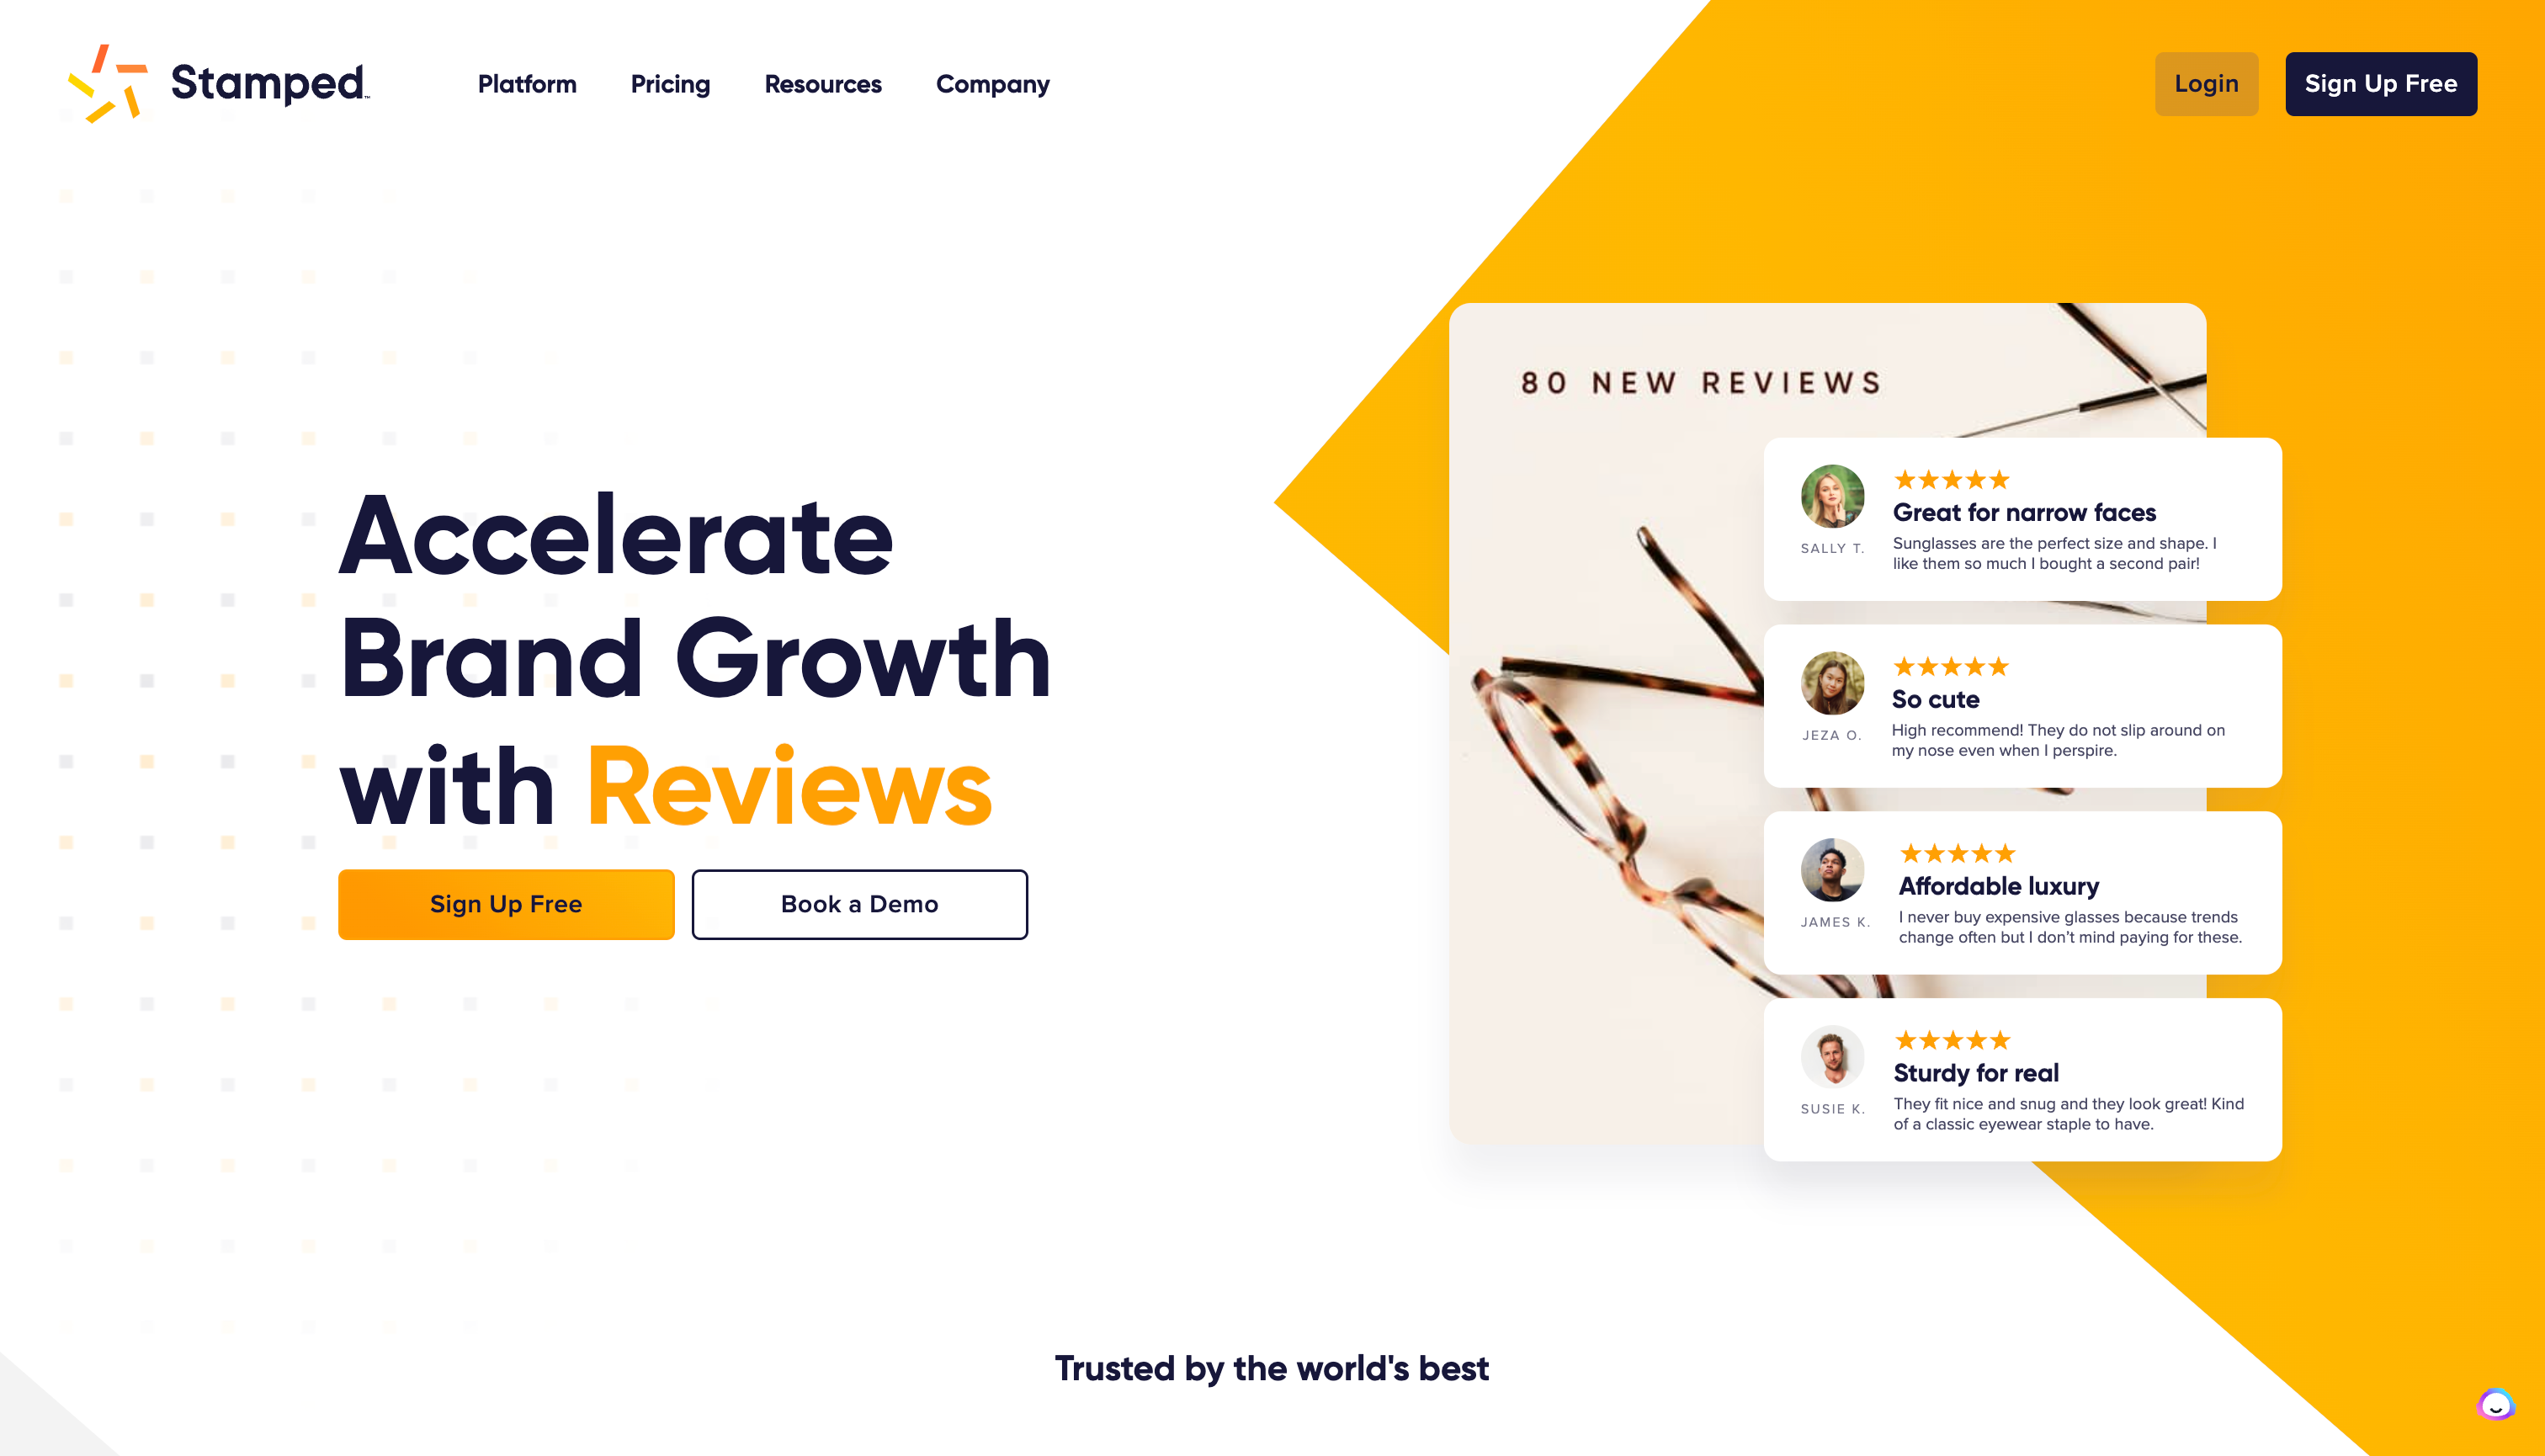 Stamped - Accelerate brand growth with reviews